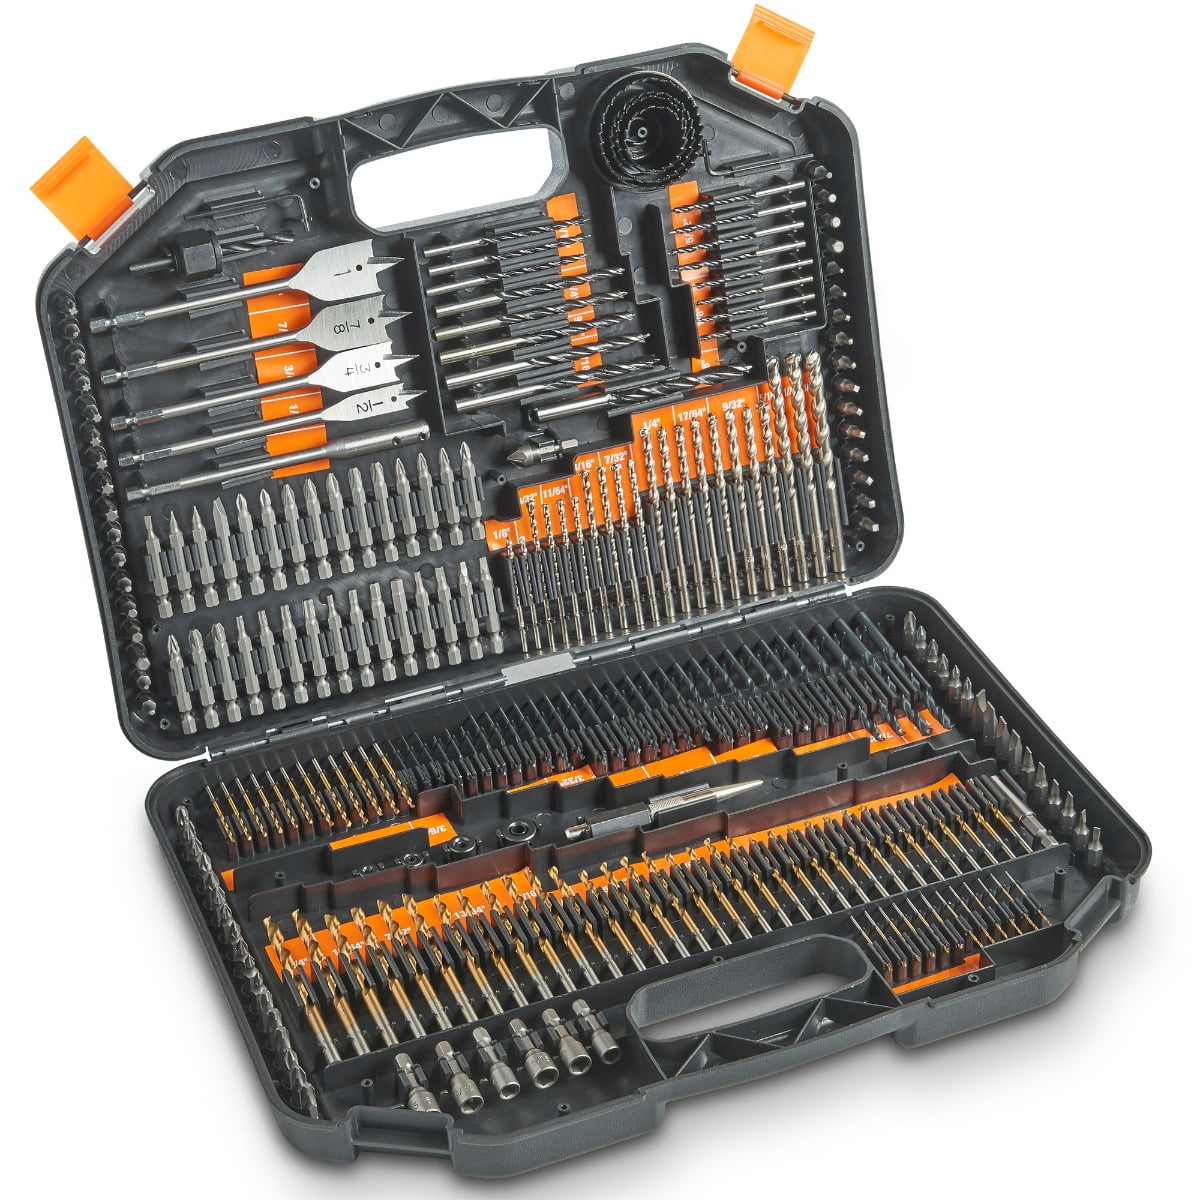 Wood and Plastics Masonry VonHaus 246-Piece Drill and Drive Bit Set with Titanium Coated HSS Bits and Storage Case for Drilling Metal